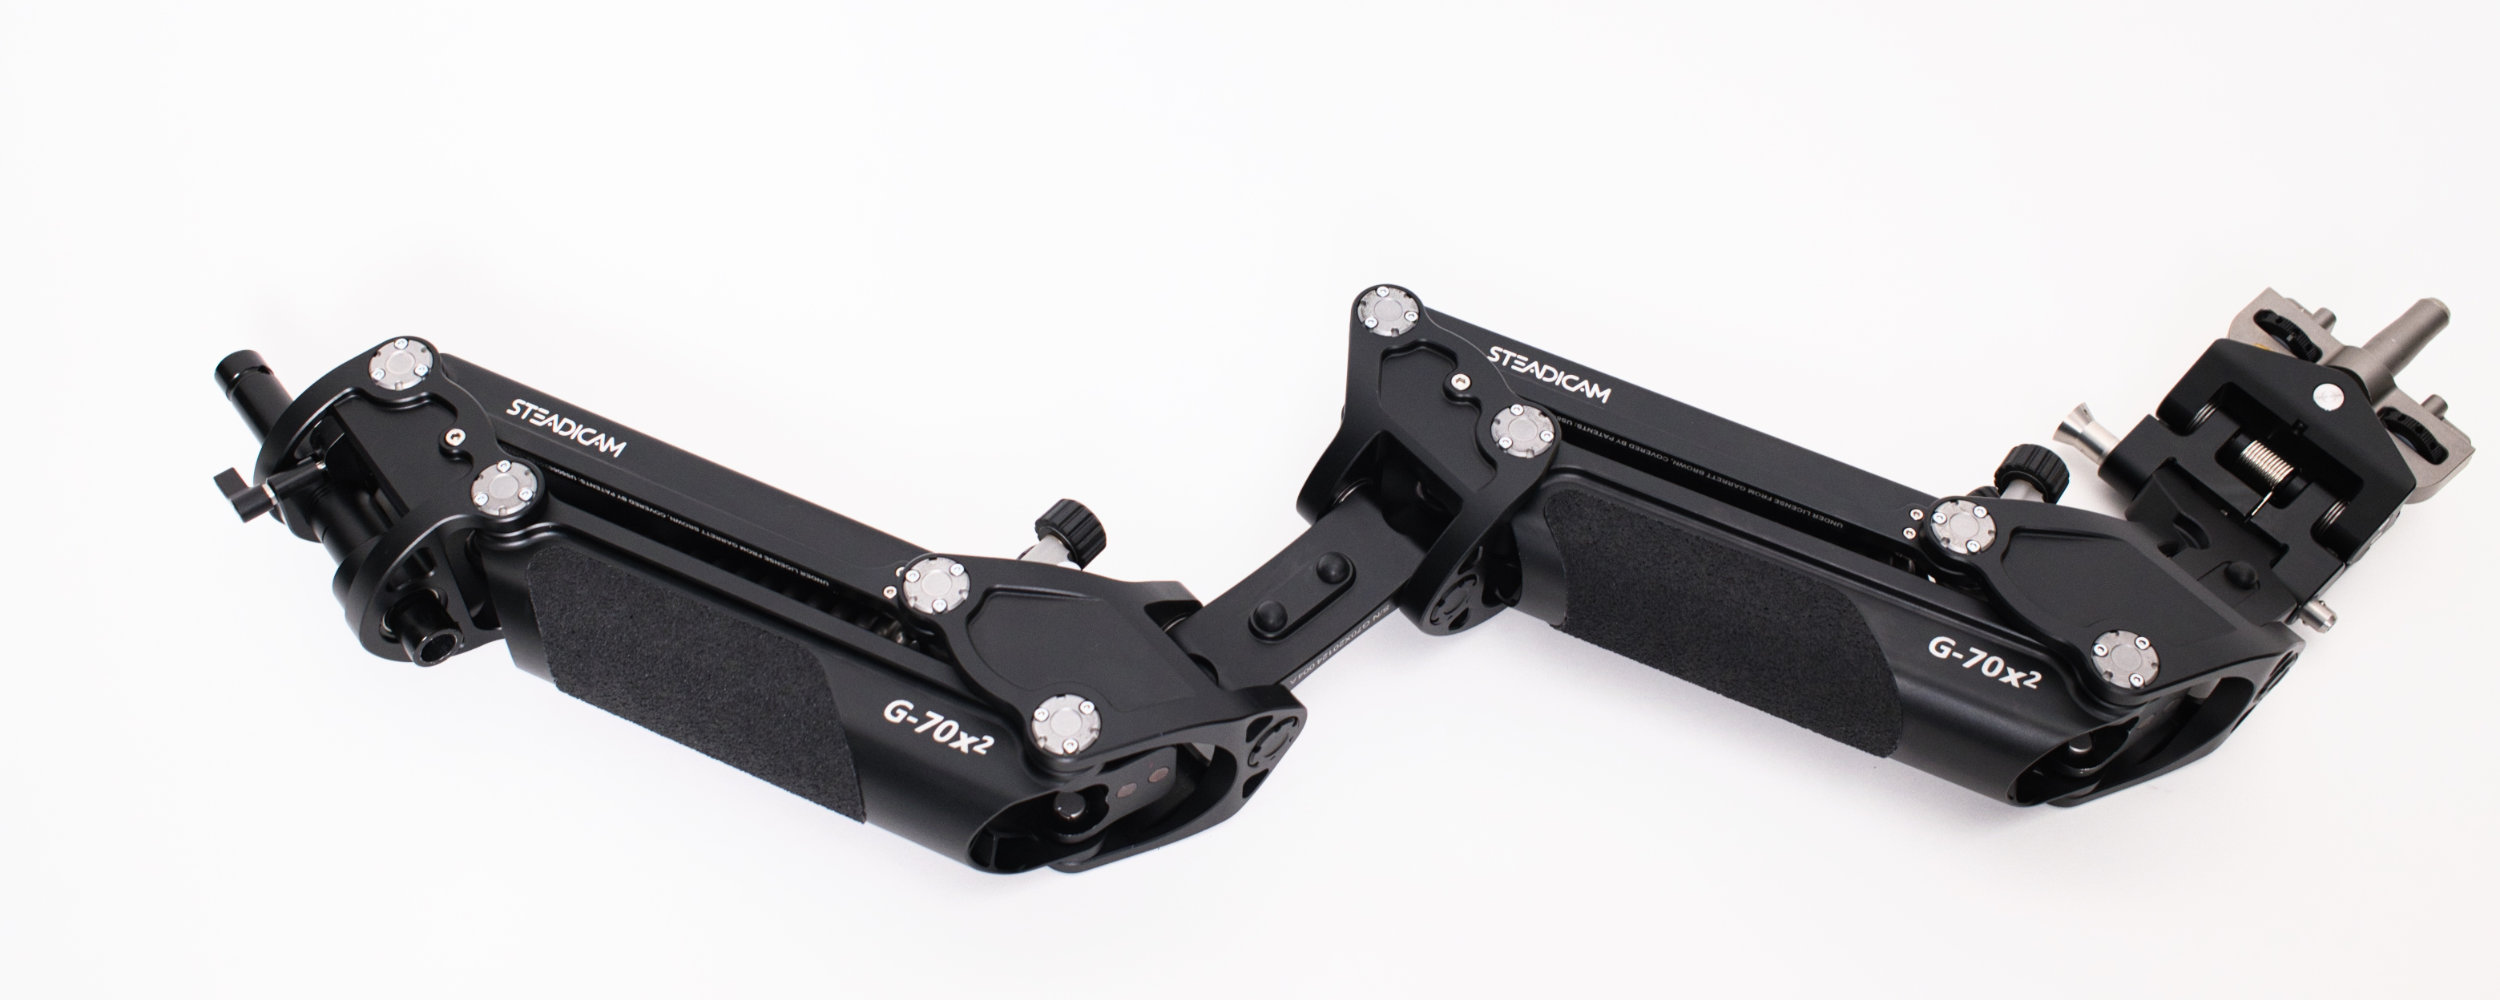 New Steadicam G-70x2 Arm for intuitive camera stabilization